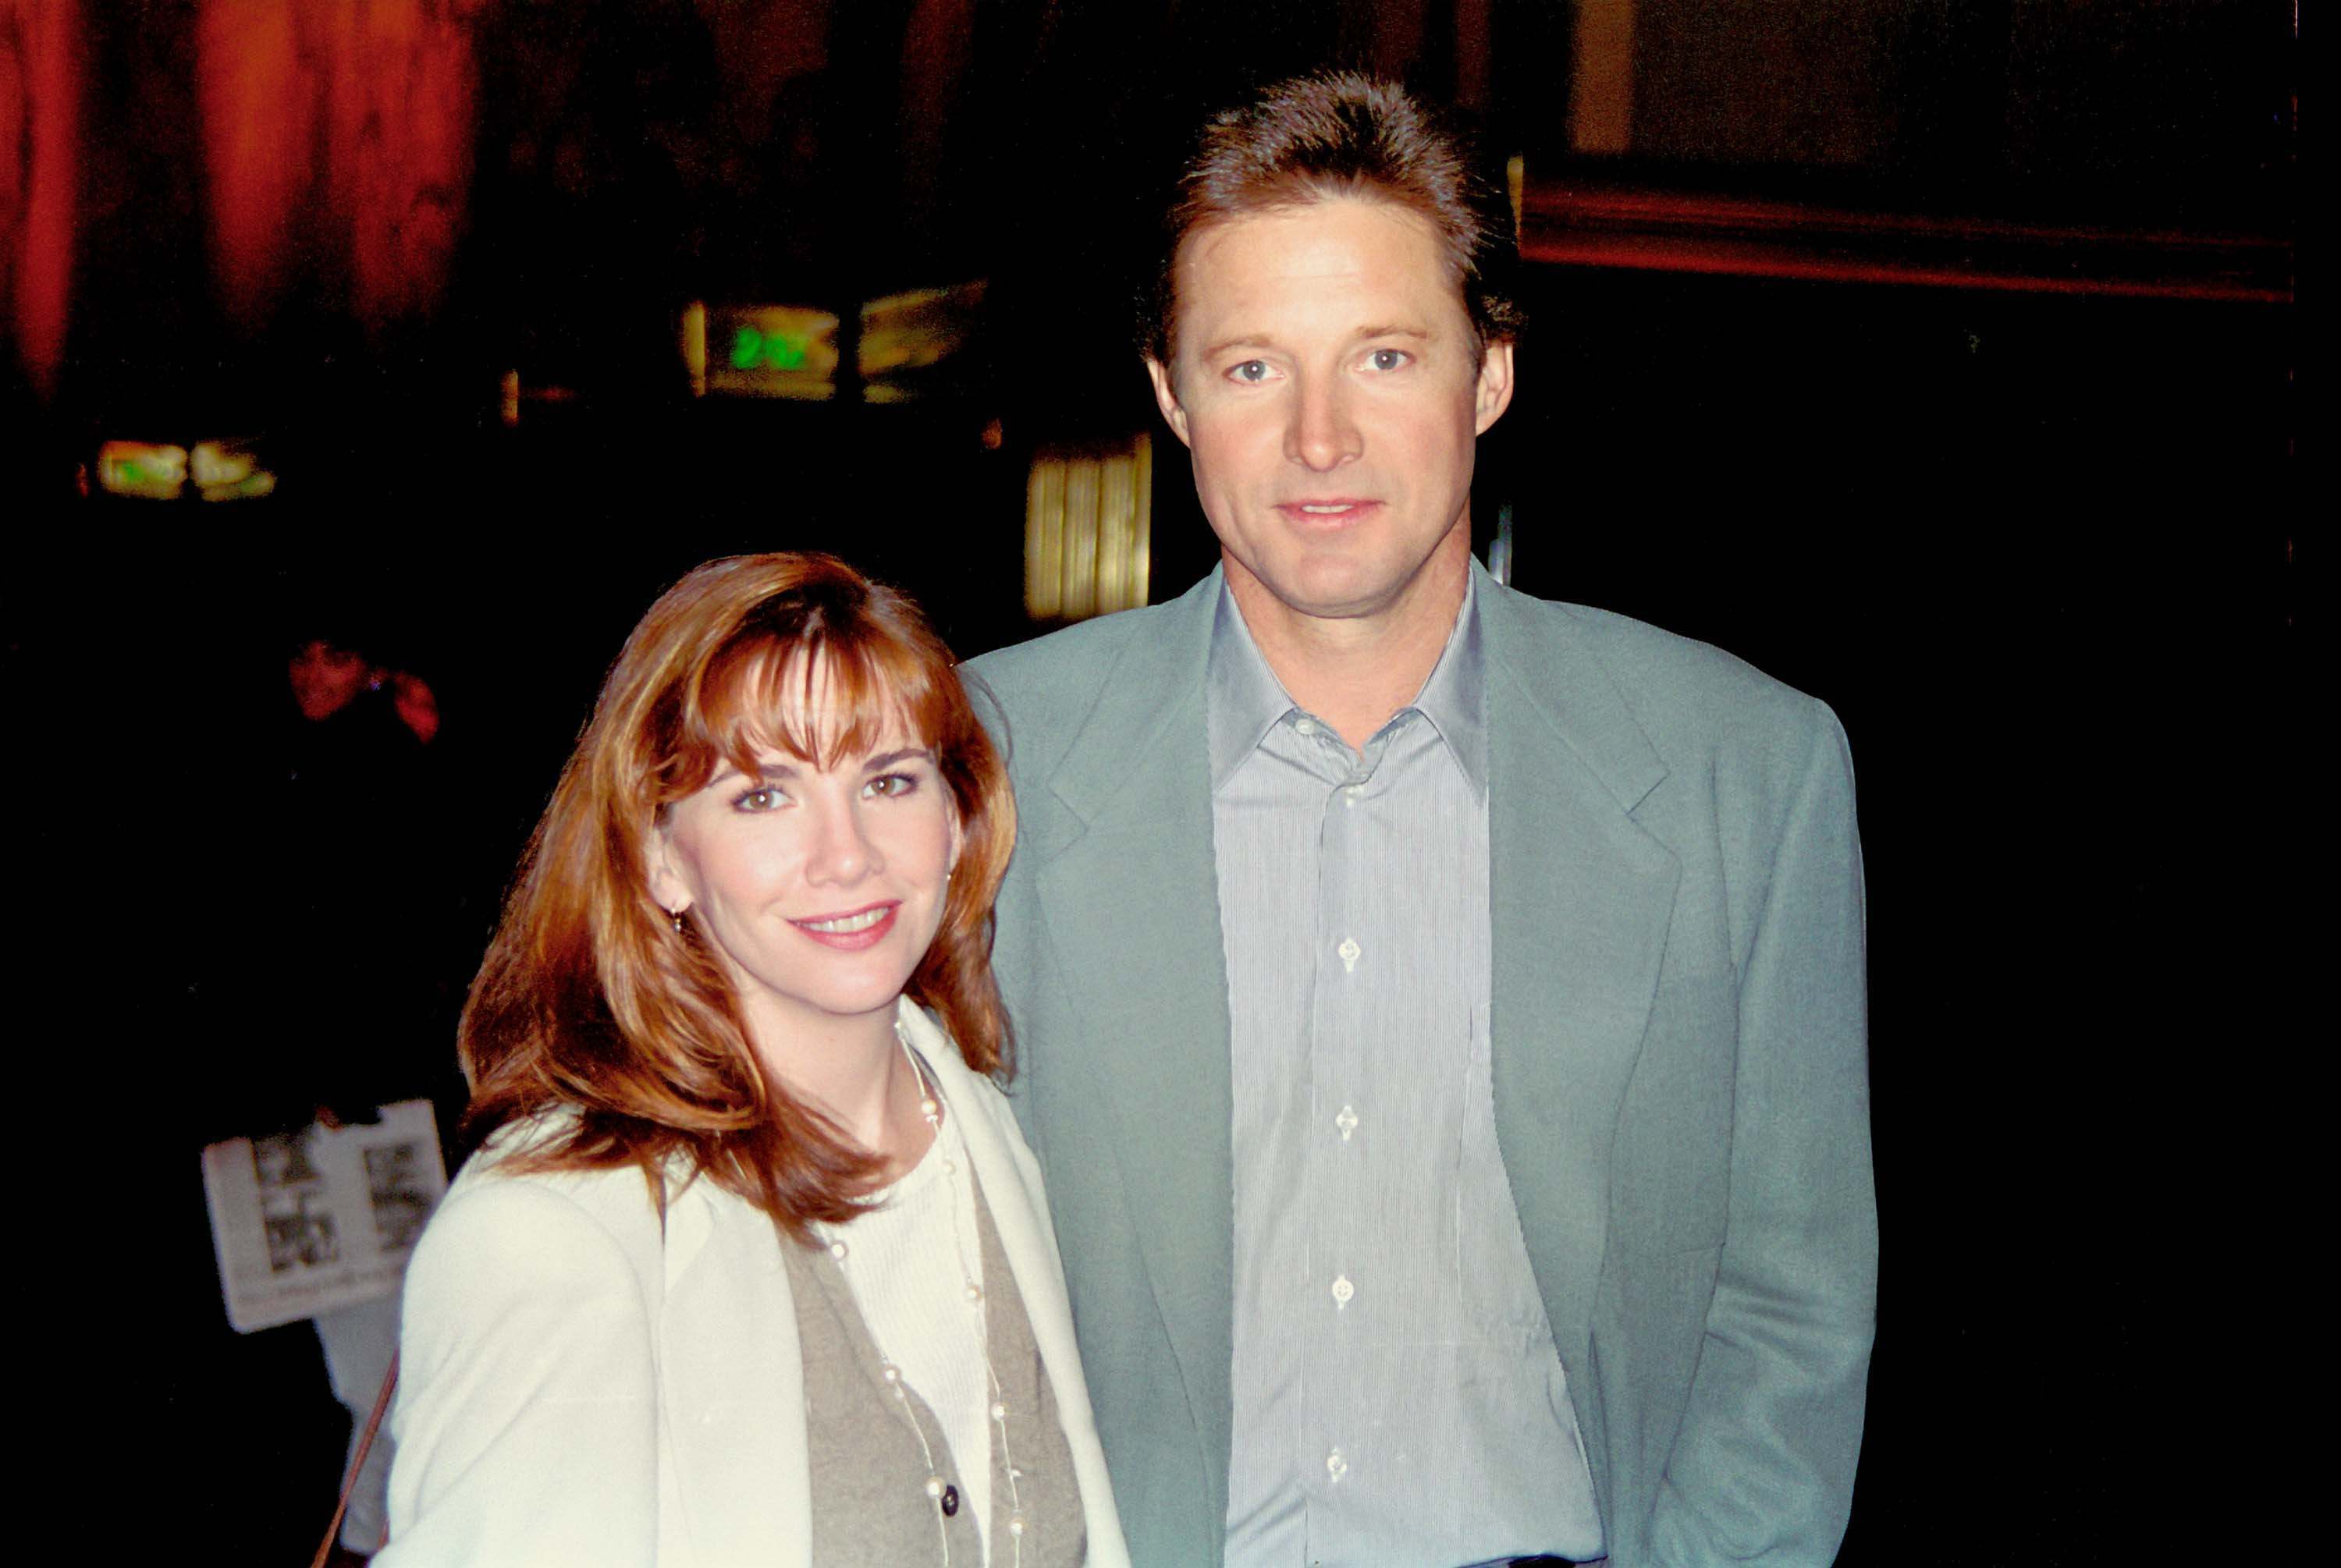 Bruce Boxleitner & Melissa Gilbert in New York 1994 | Source: Getty Images